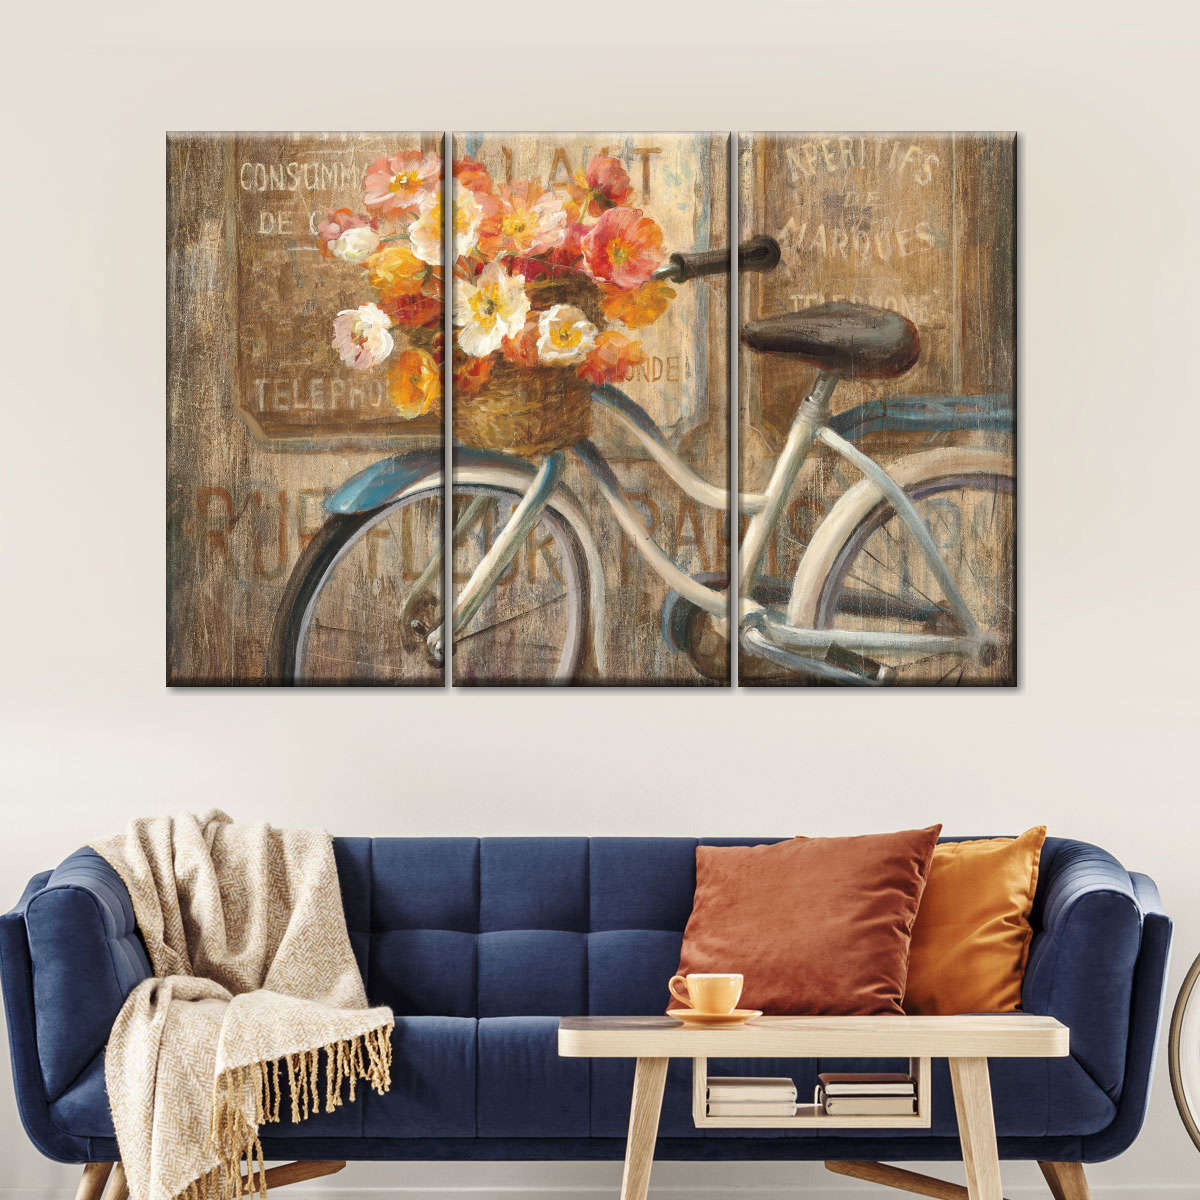 Canvas Wall Art Near Me - See more ideas about canvas wall art, oil ...